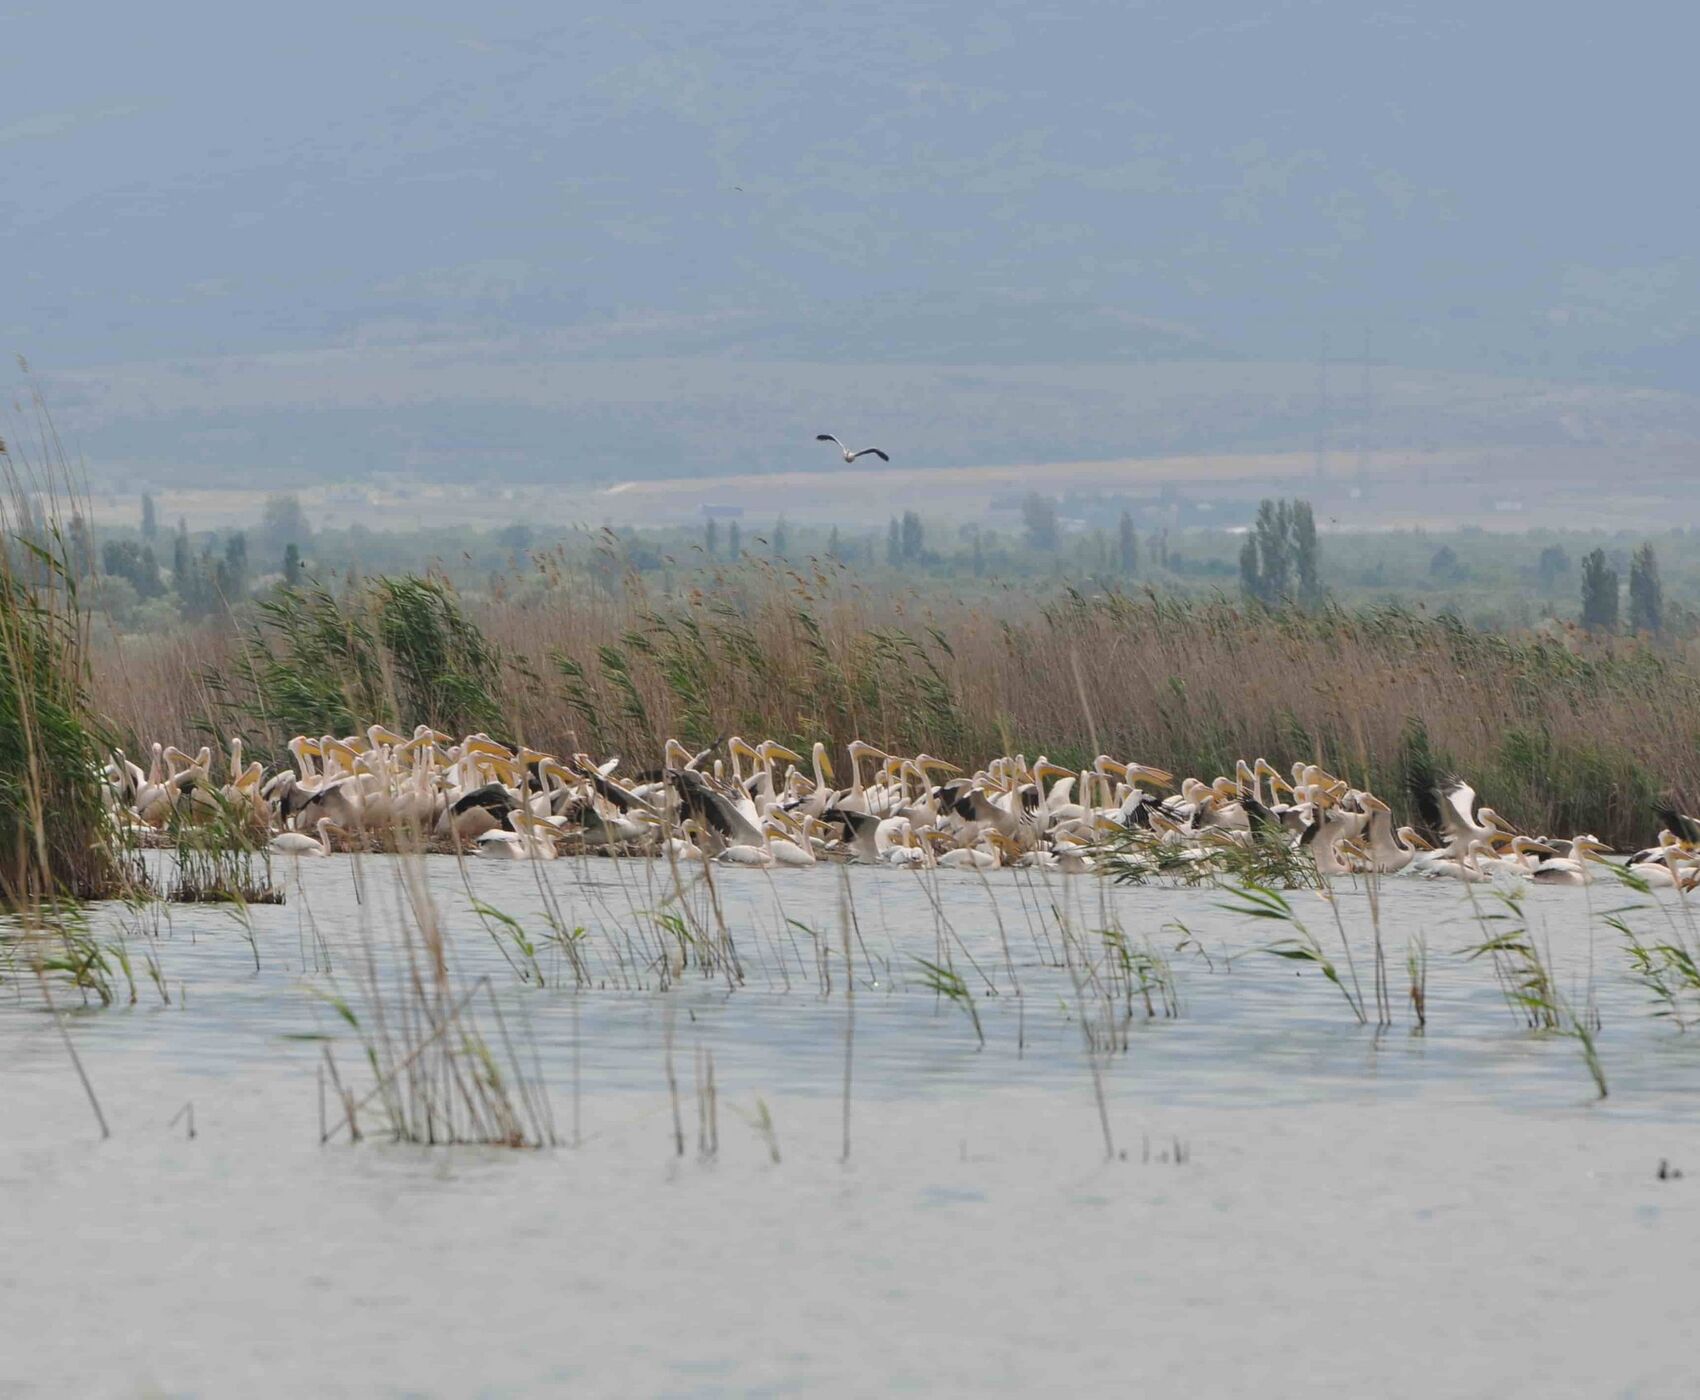 LAKES OF FLAMINGOS, STORKS AND PELICANS